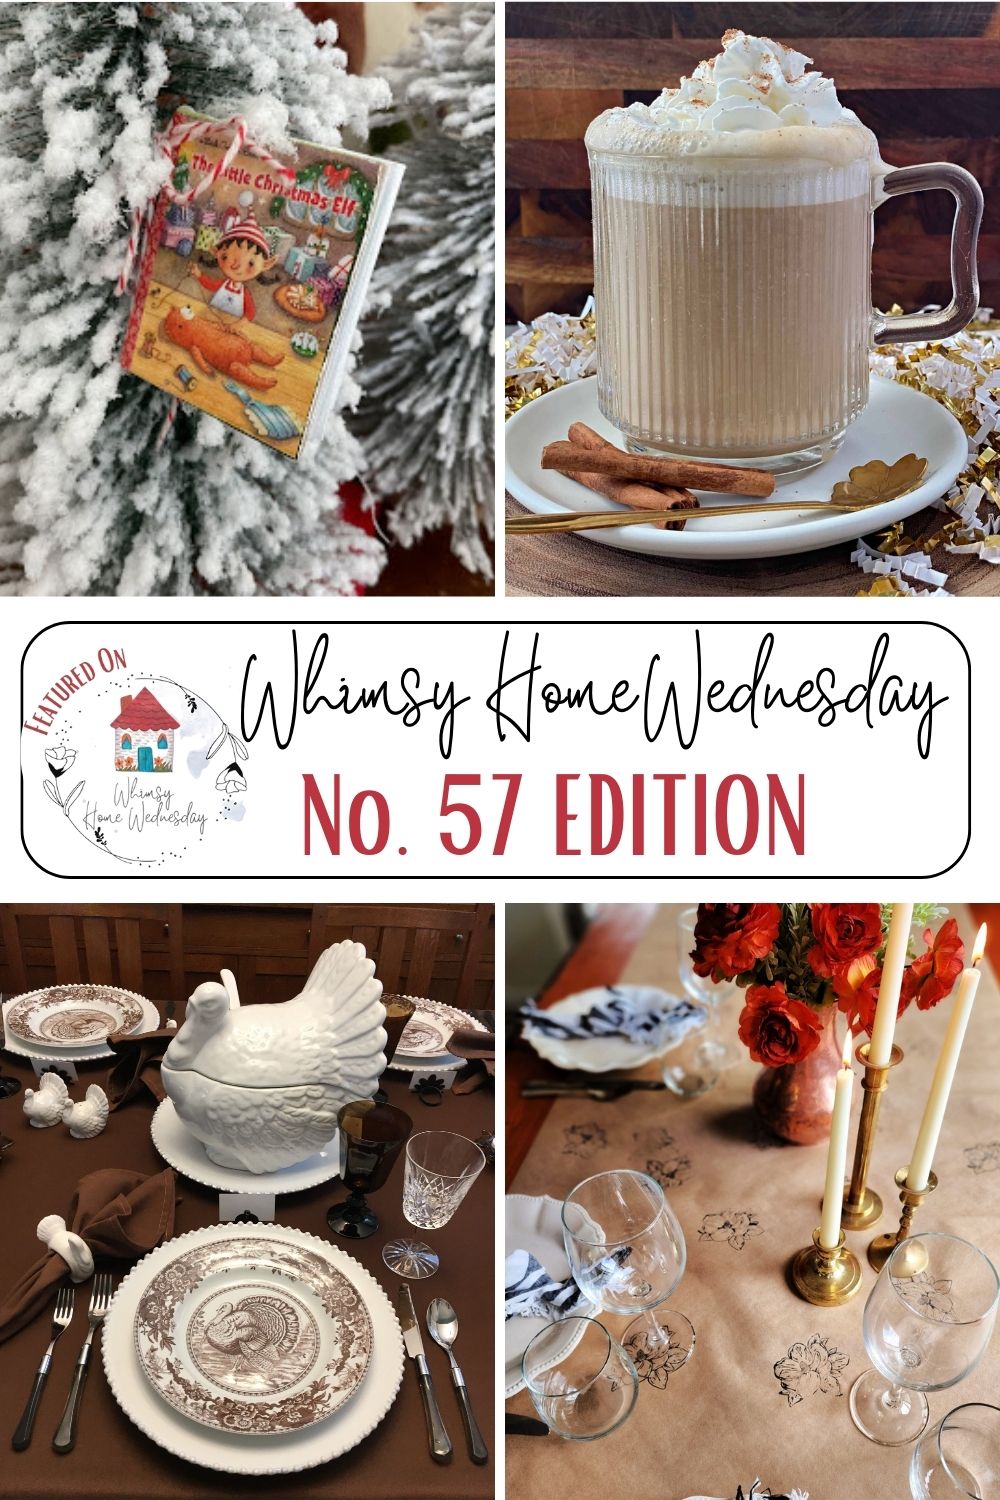 Join us on Whimsy Home Wednesday Blog Link Party No. 57 and see host projects, the features from the previous week and link up your posts!